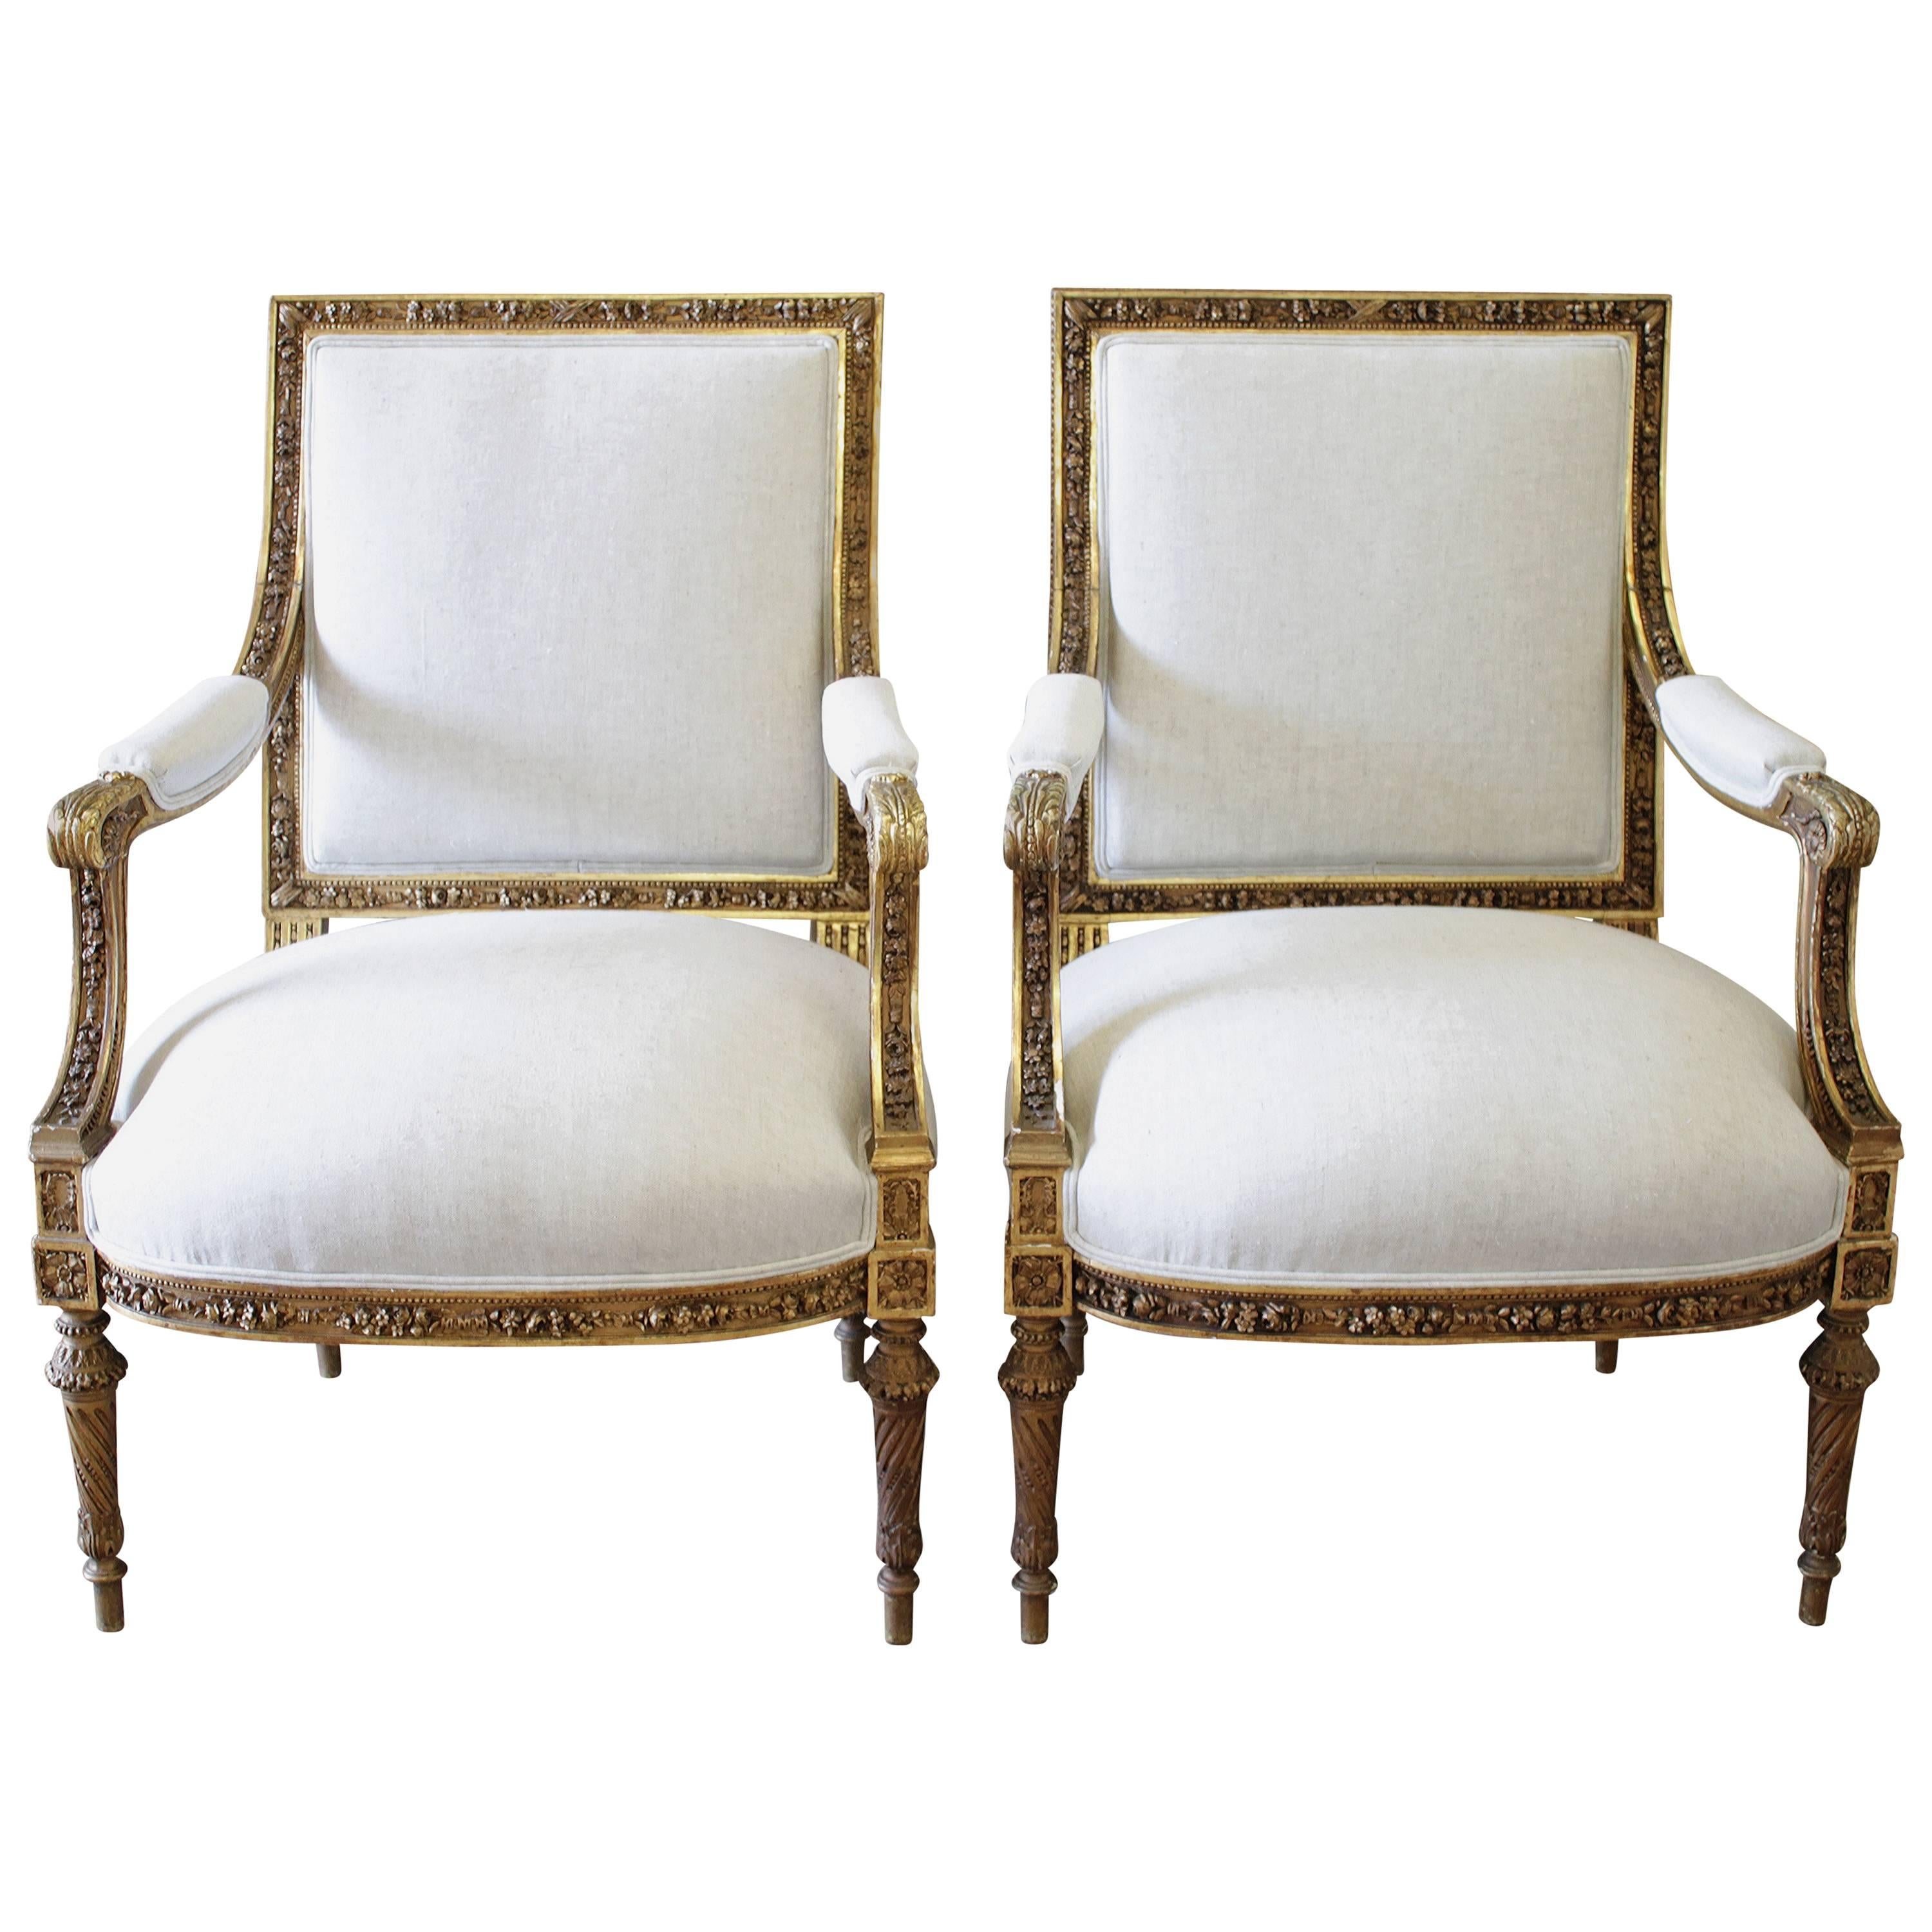 Pair of 19th Century Louis XVI Carved Giltwood Chairs